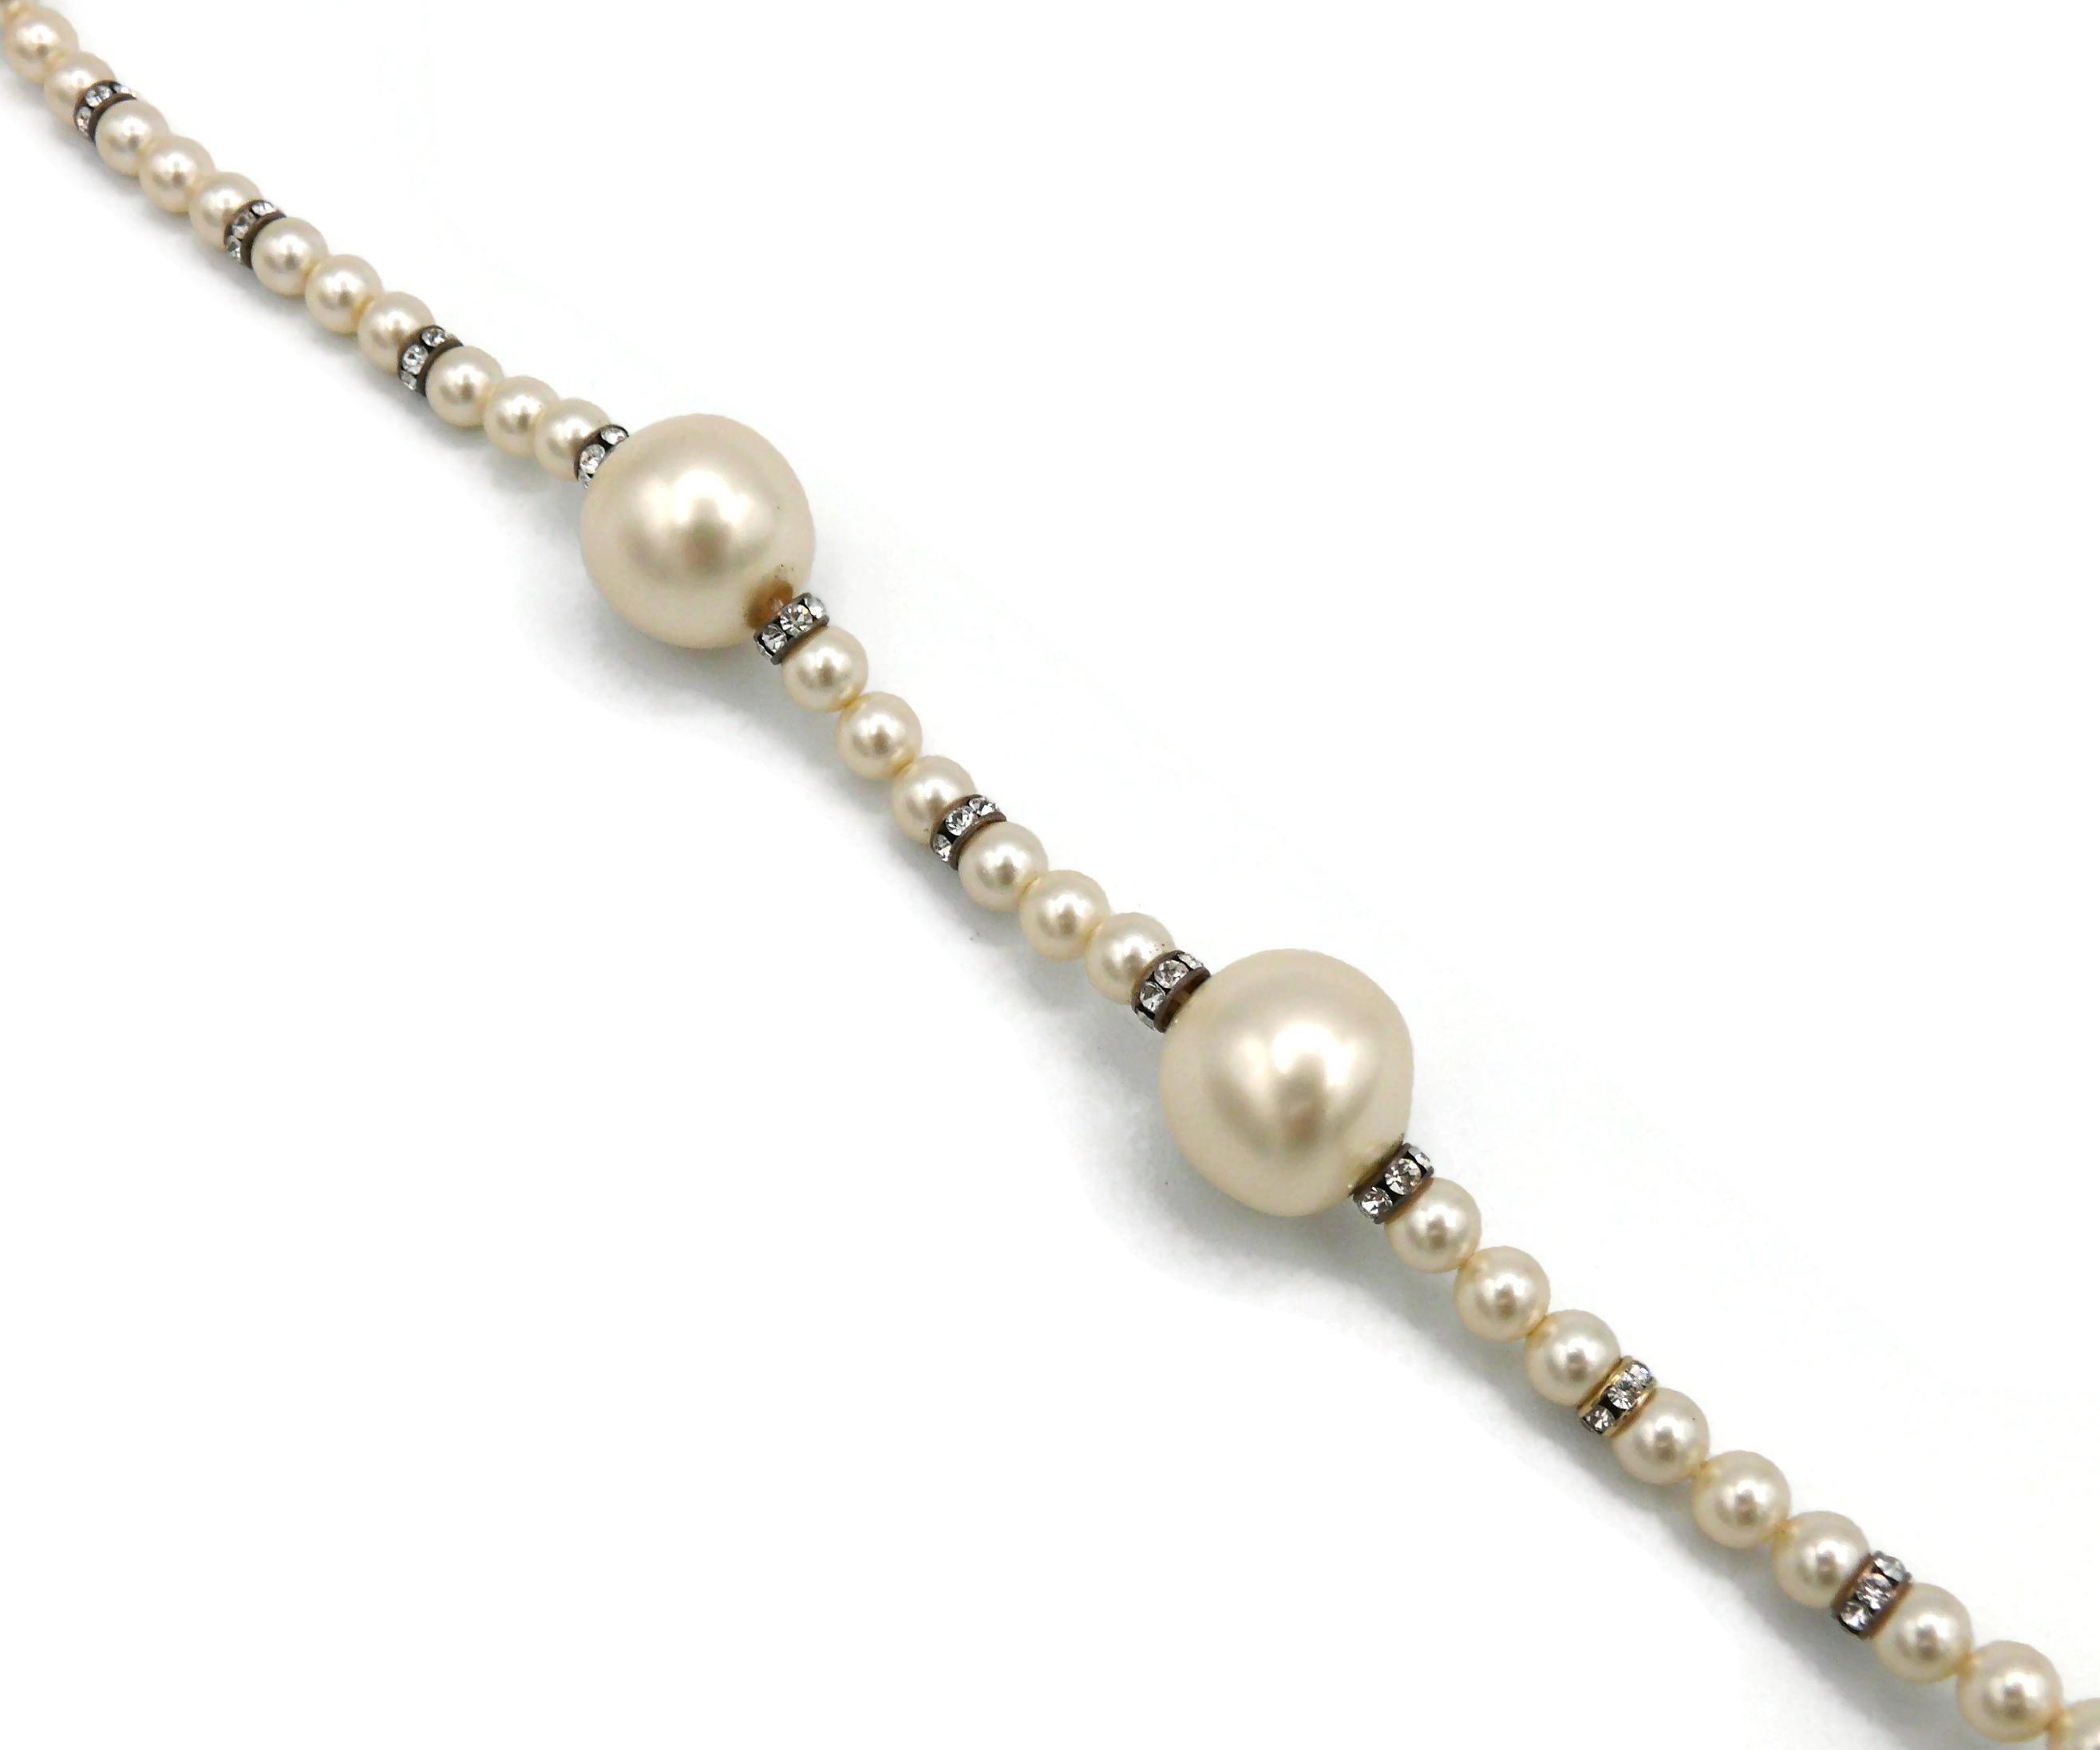 CHANEL by KARL LAGERFELD Vintage Faux Pearl and Crystal Necklace, Fall 1993 For Sale 4